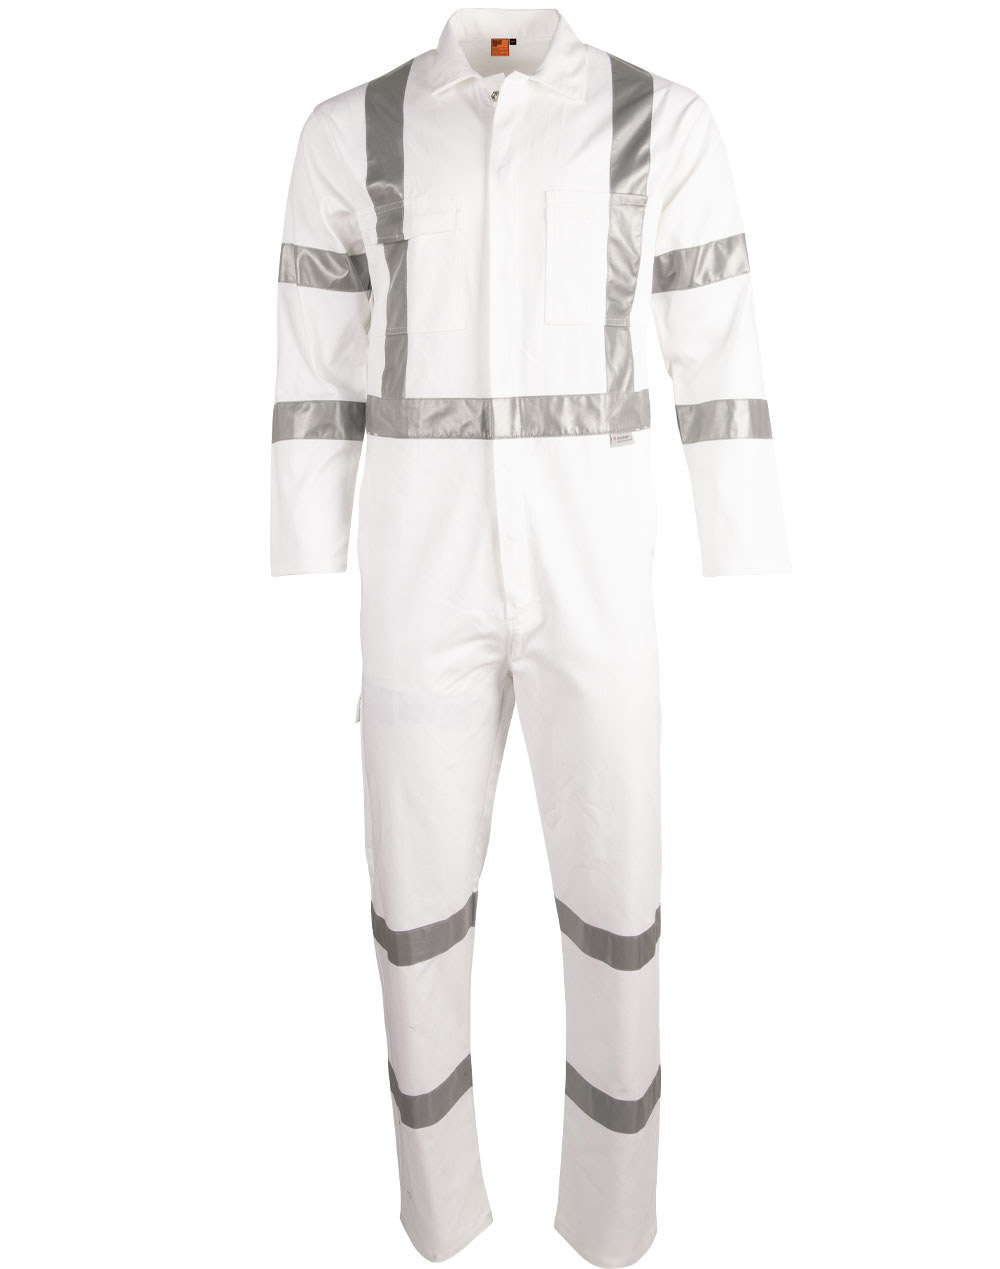 WA09HV Mens Biomotion Nightwear Coverall With X Back Tape Configuration